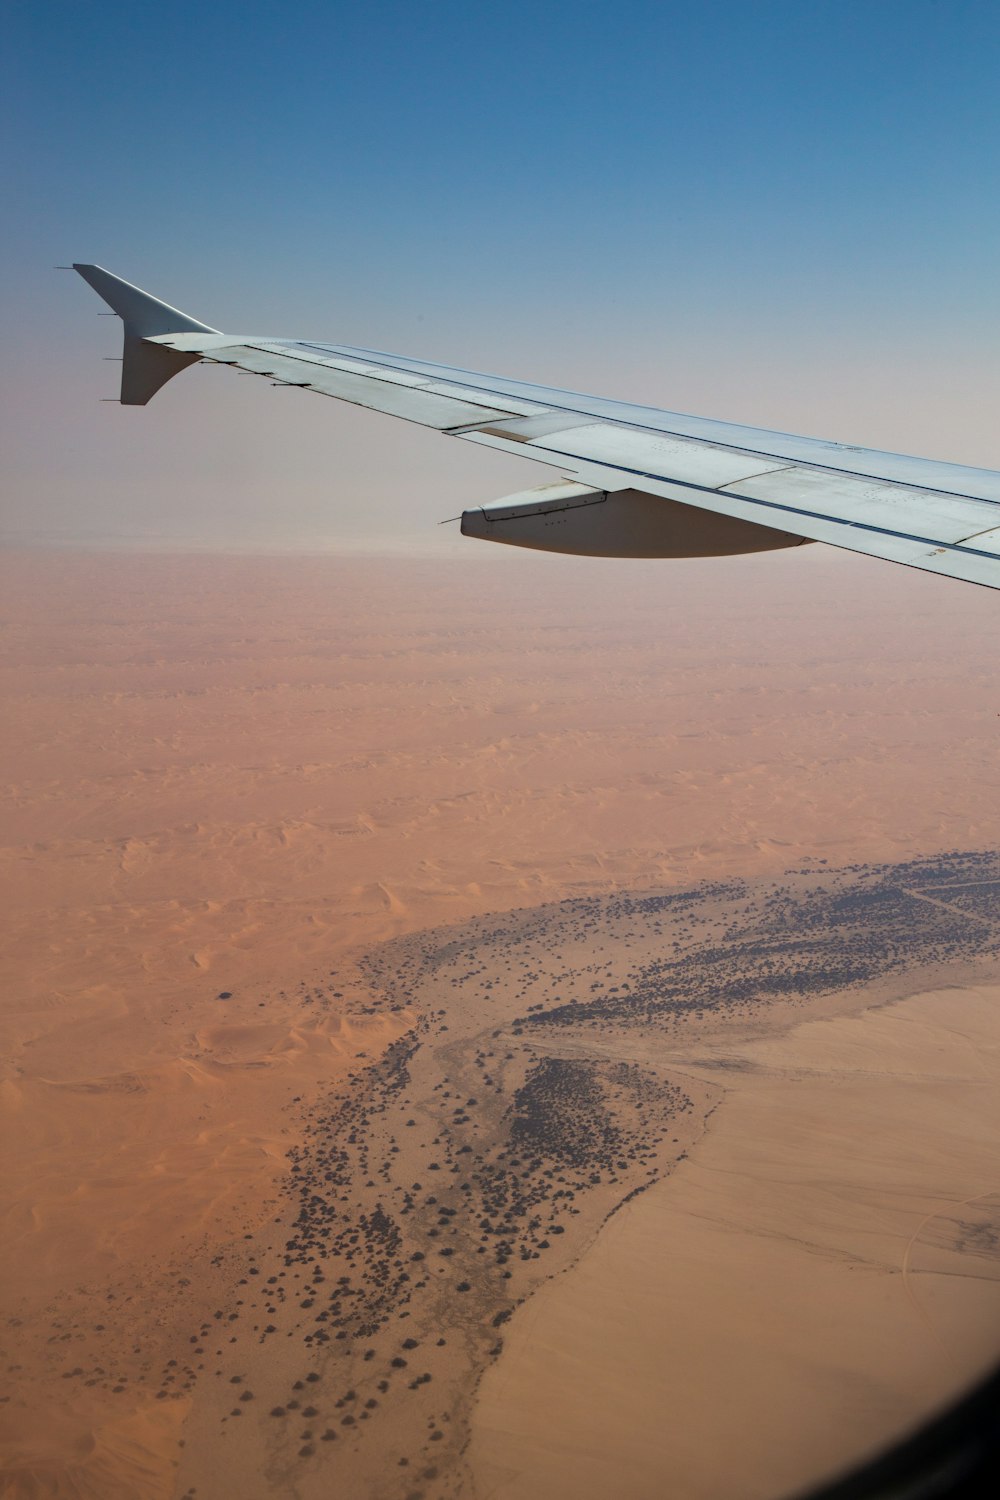 the wing of an airplane flying over a desert